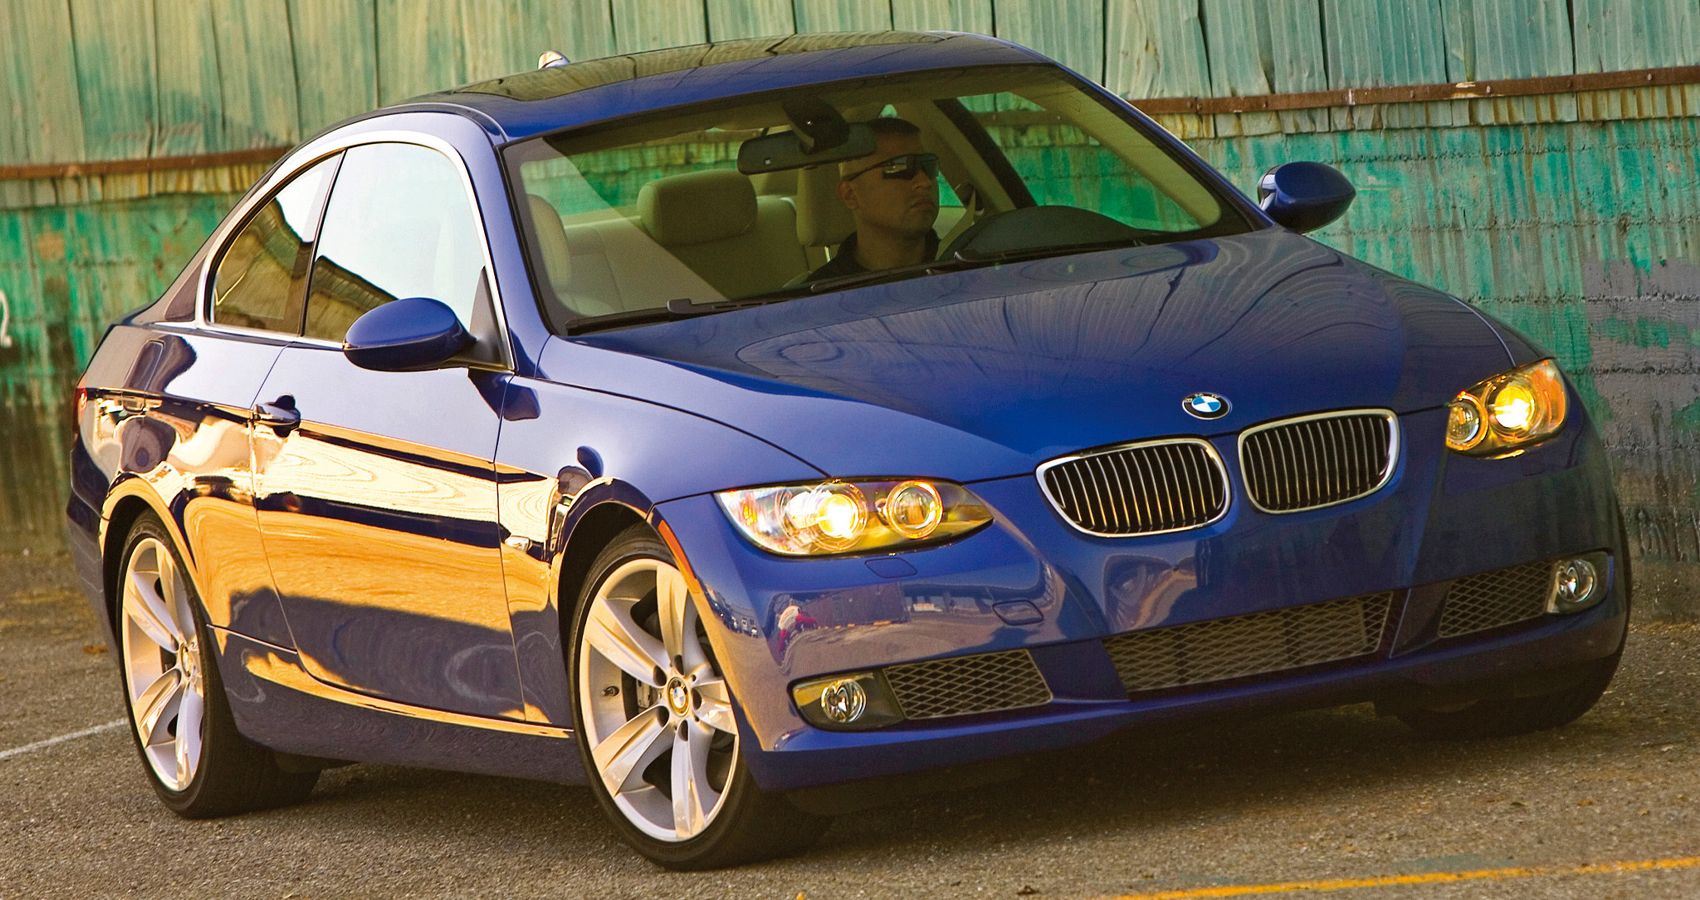 The front of the 335i Coupe in blue